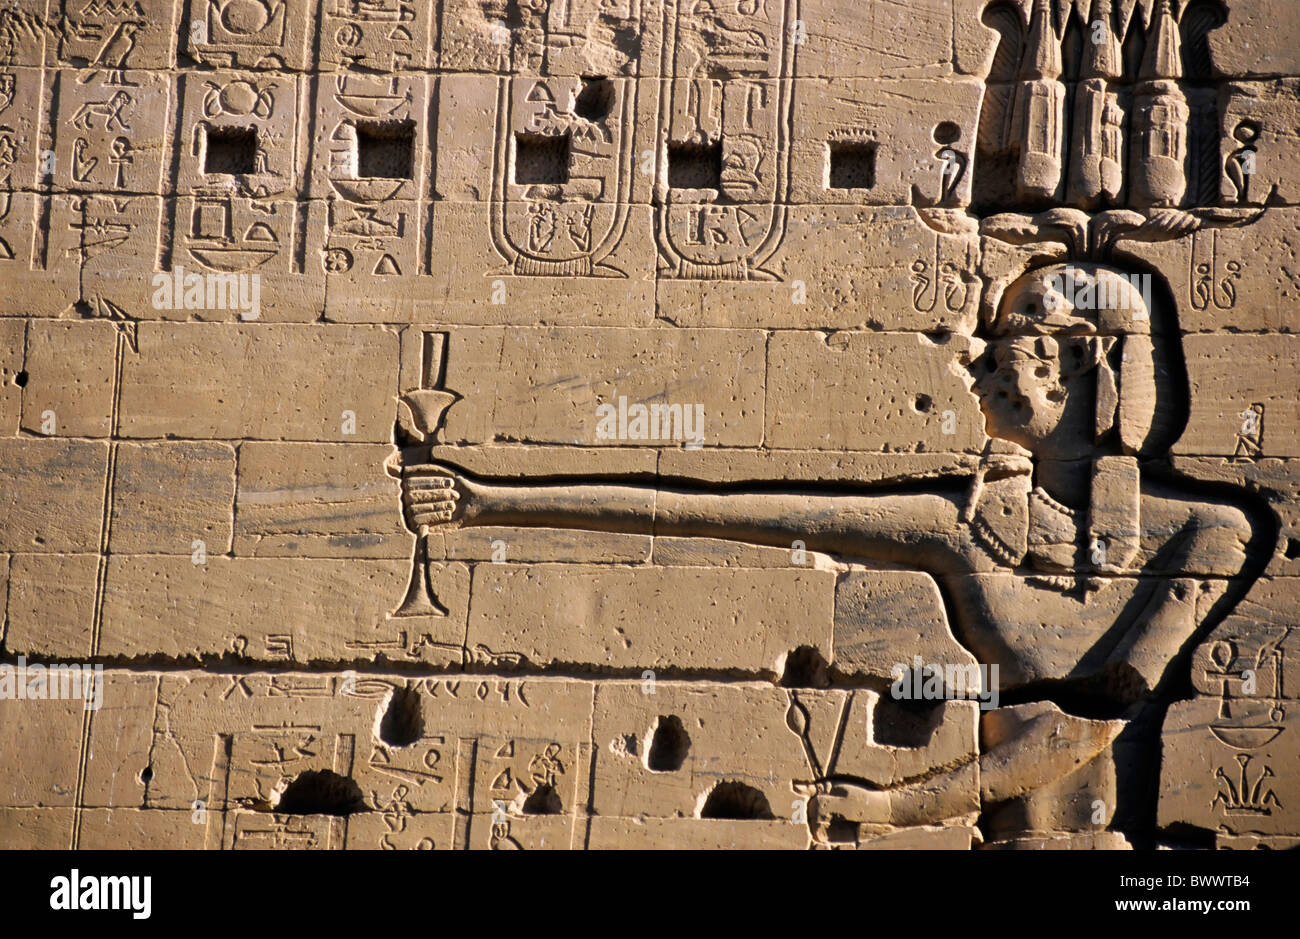 Detail of a carved stone wall at the ancient temple for Isis on the island of Philae on the Nile river, Egypt. Stock Photo